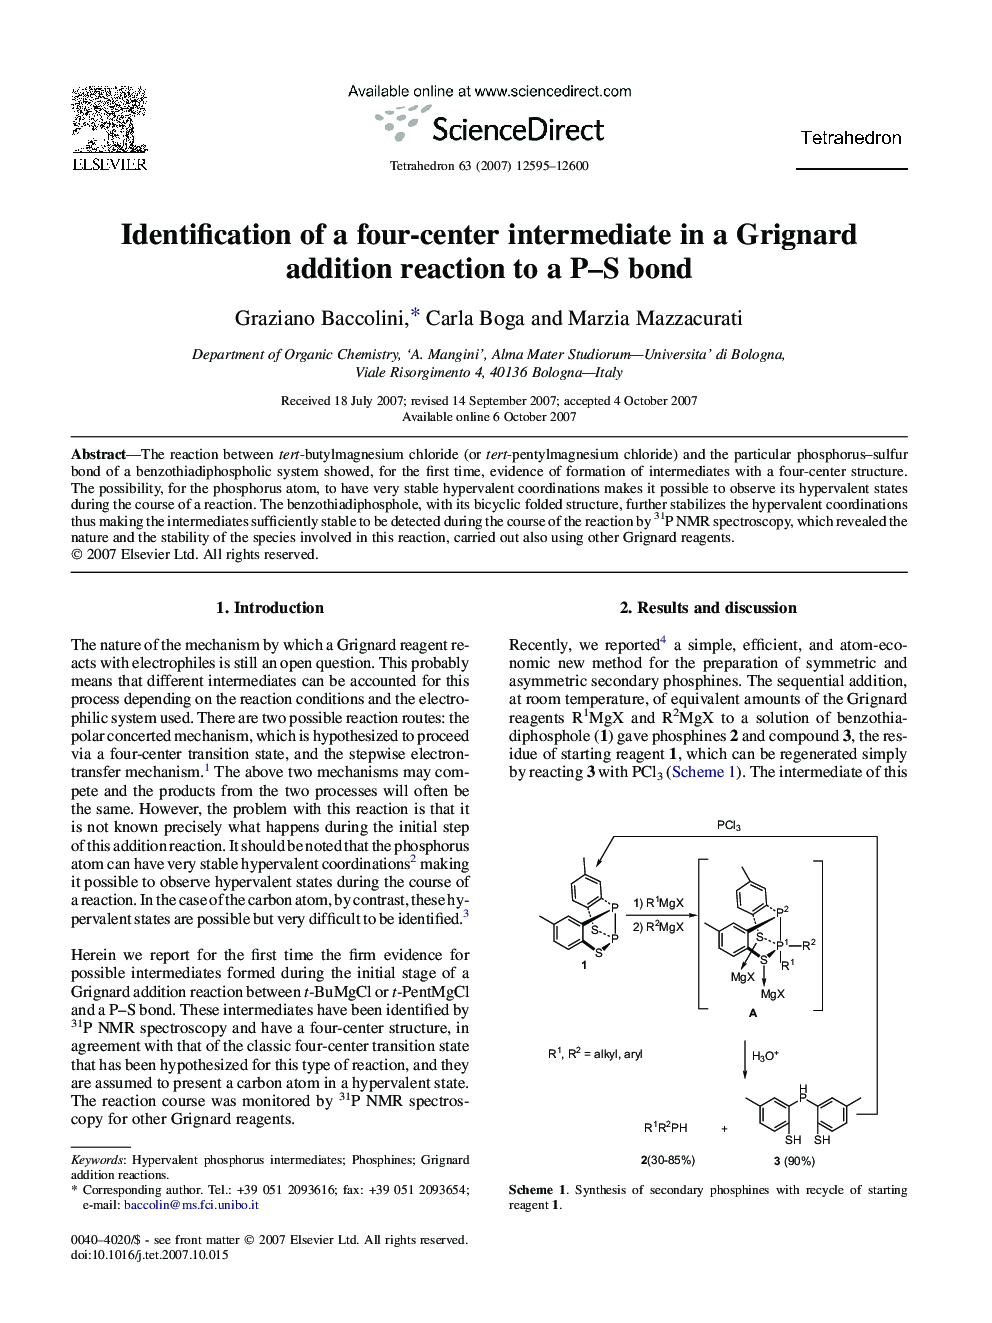 Identification of a four-center intermediate in a Grignard addition reaction to a P-S bond